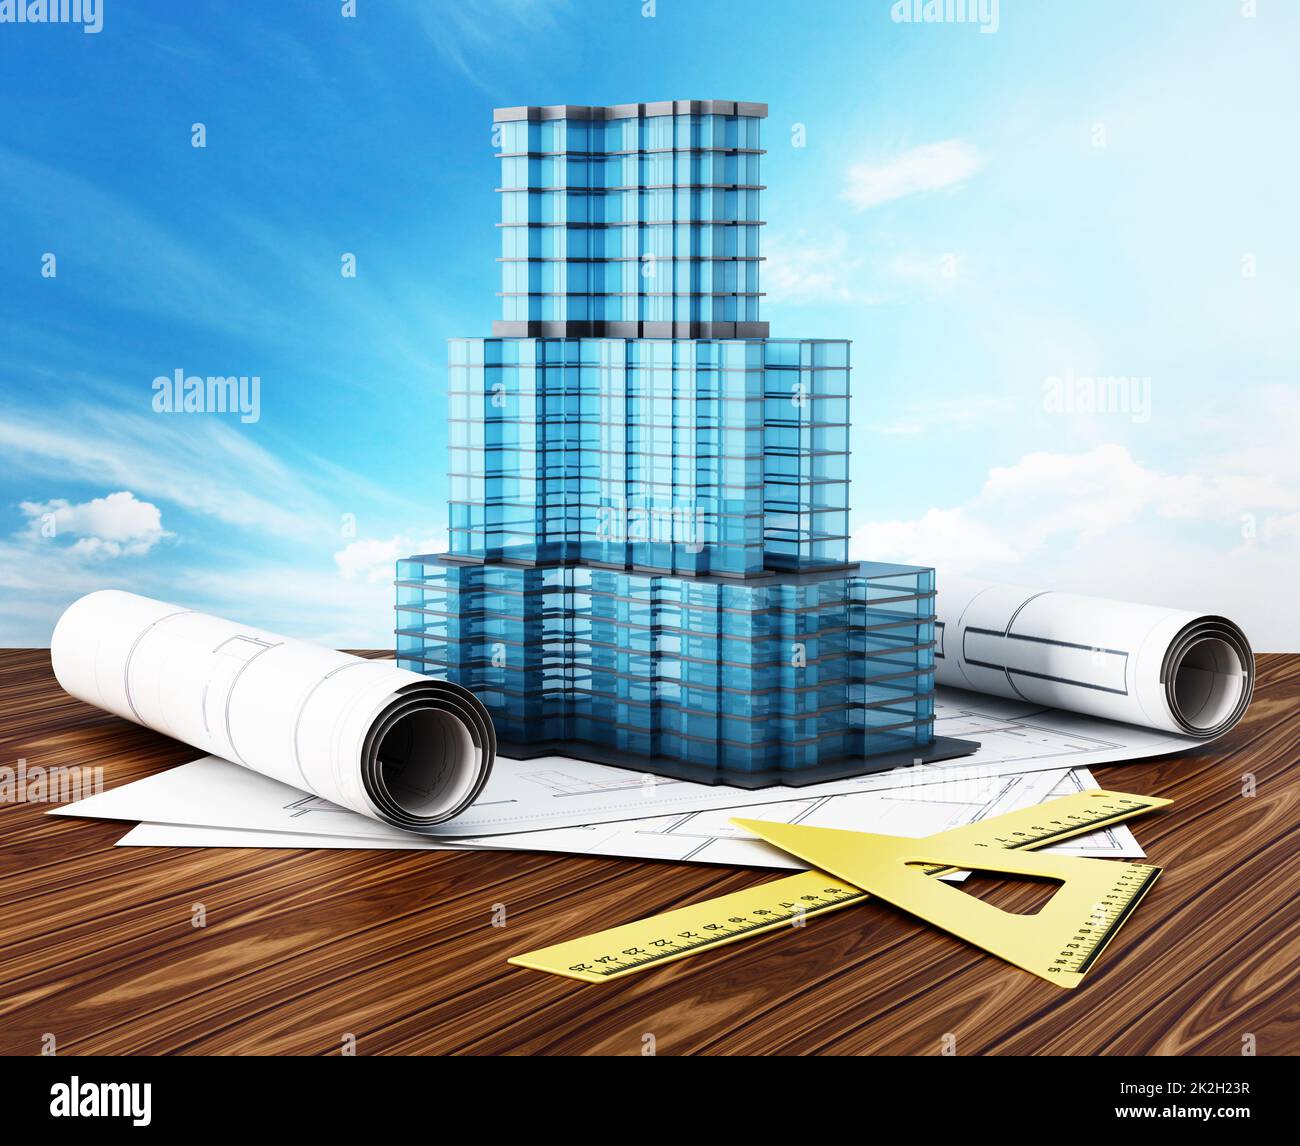 Building construction project Stock Photo